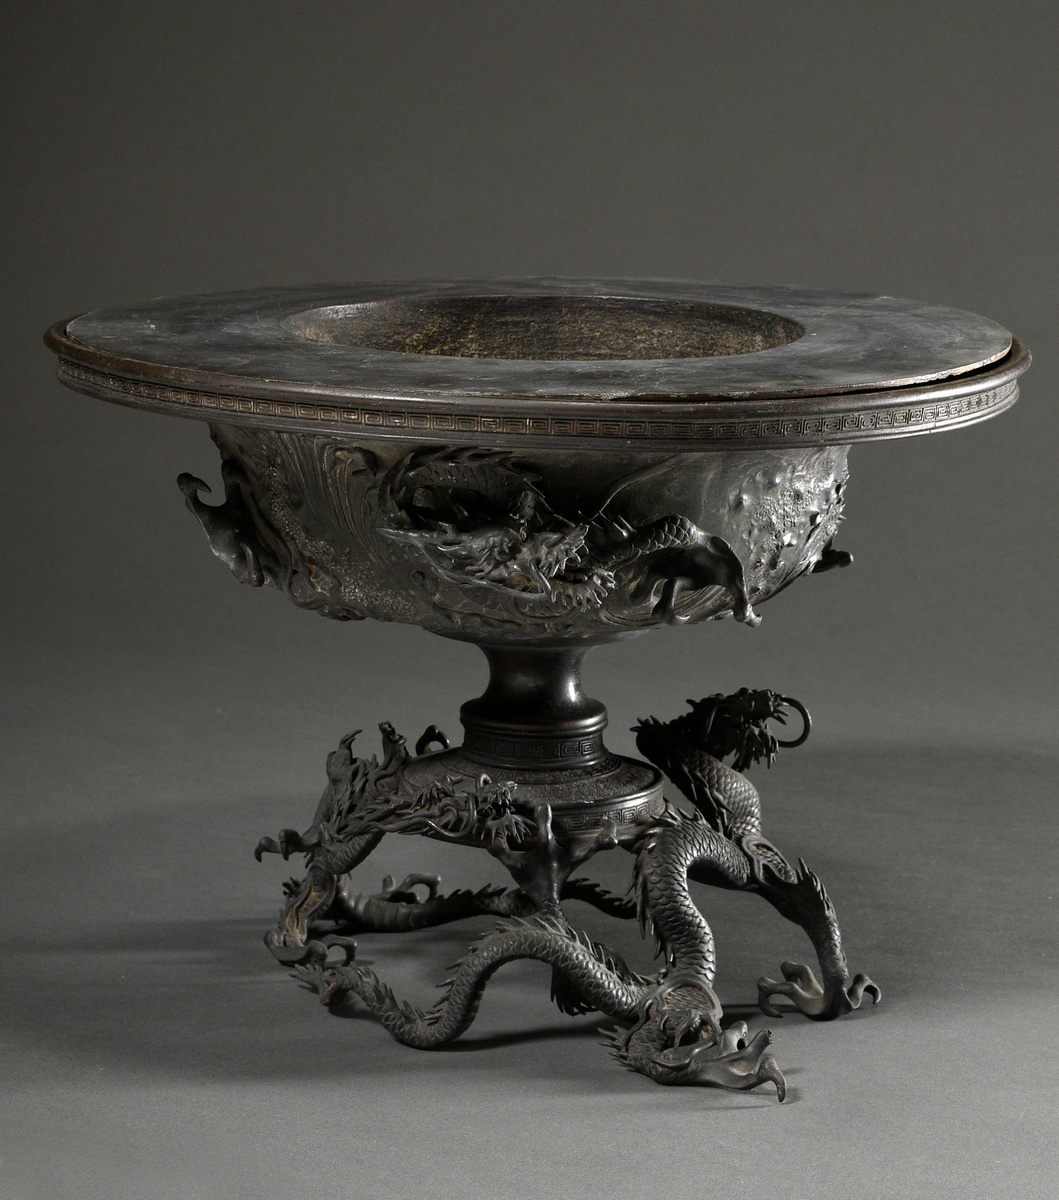 Three-part incense burner with sculpted dragon at the foot and on the wall, signed watakumo chûzo 渡